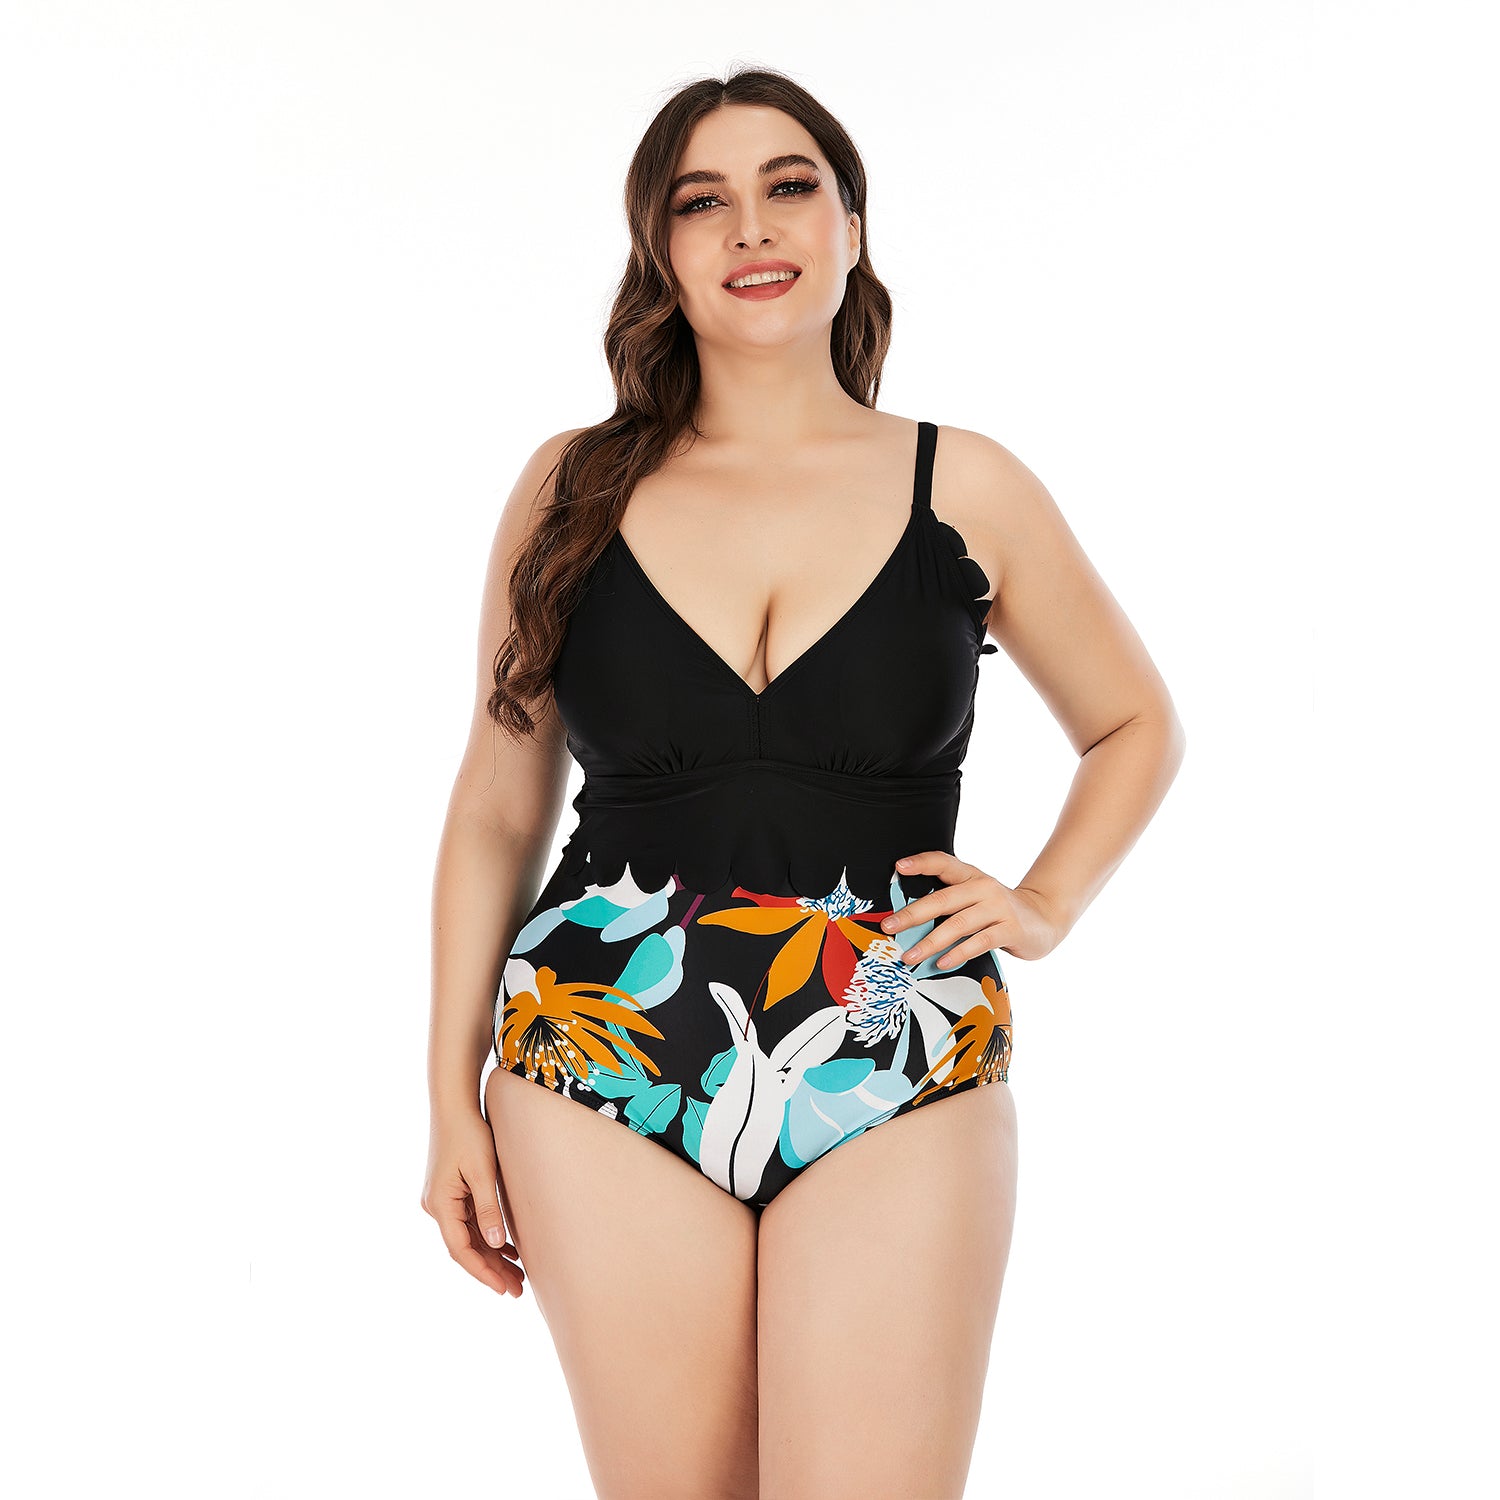 SiySiy Women's Plus Size Swimsuit with Shorts Wavy Two Piece Swimsuit Floral Print Swimwear